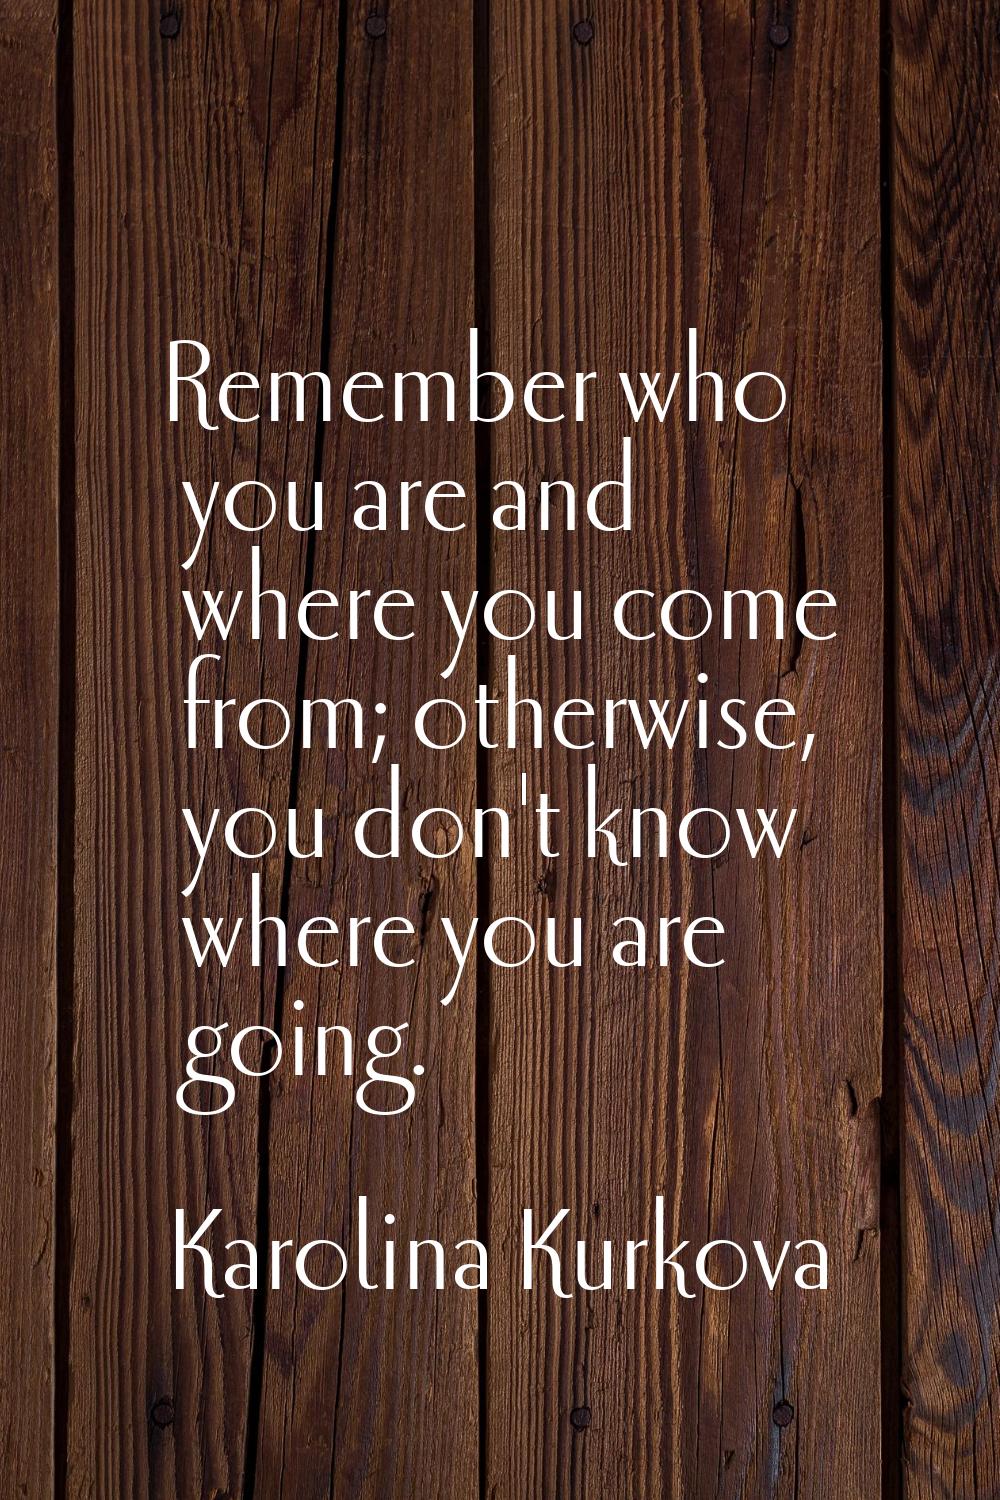 Remember who you are and where you come from; otherwise, you don't know where you are going.